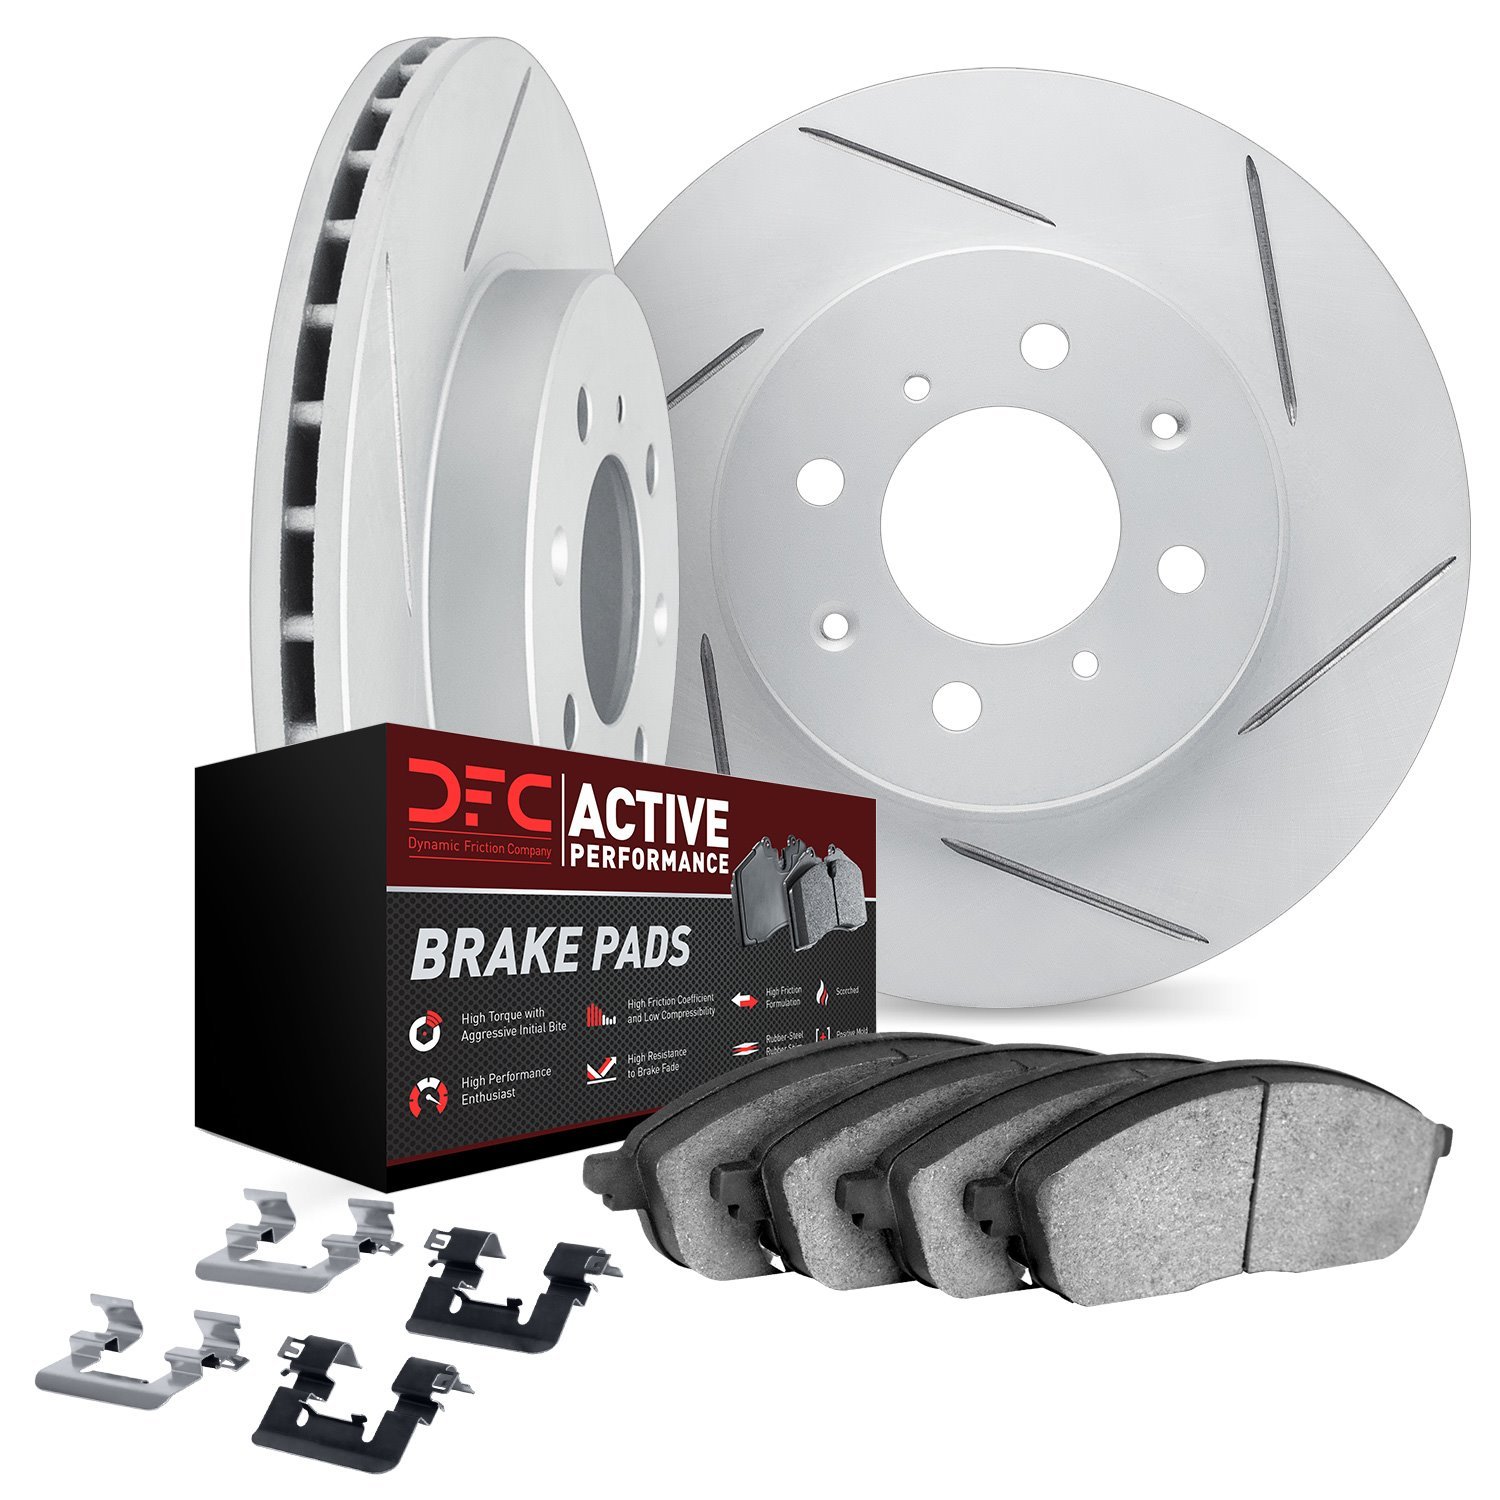 2712-54039 Geoperformance Slotted Brake Rotors with Active Performance Pads Kits & Hardware, 2008-2011 Ford/Lincoln/Mercury/Mazd